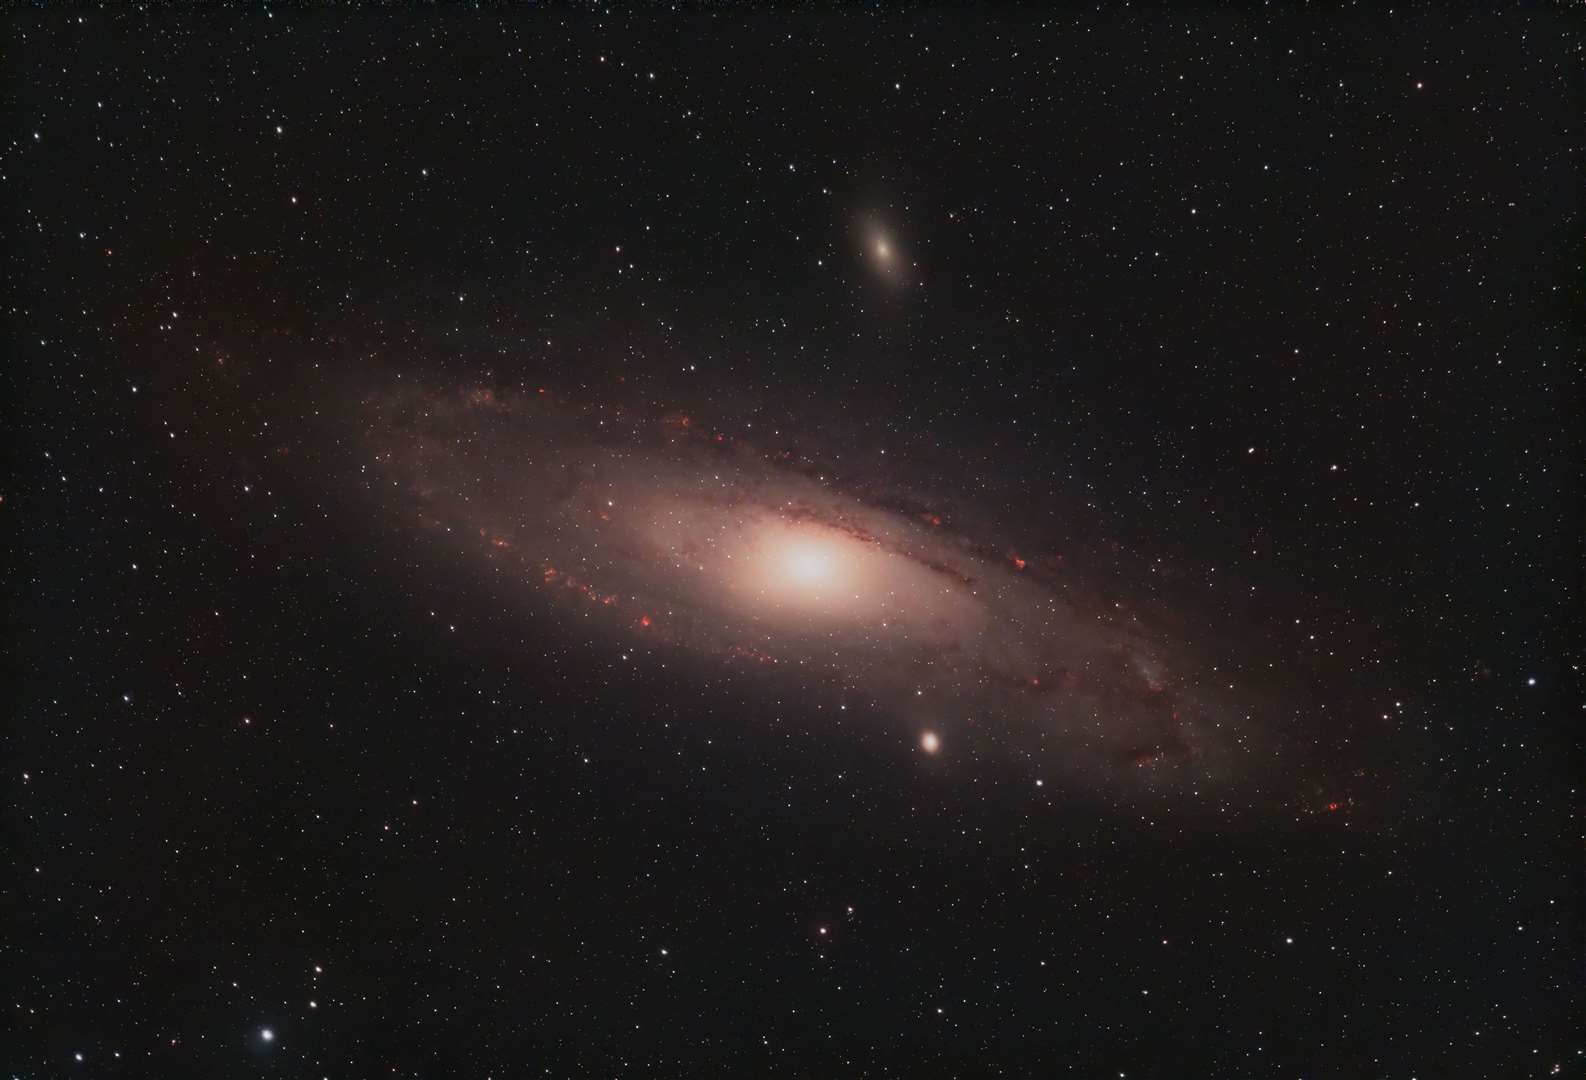 Moving on from our own galaxy is the Andromeda Galaxy (M31) which can found in the constellation of Andromeda and is 2.5 million light years from earth.The bright red/pink areas in the arms of the galaxy are regions where star formation is taking place. Andromeda is larger than our galaxy and is on a collision course and will ultimately merge with the Milky Way Galaxy in about four to five billion years.